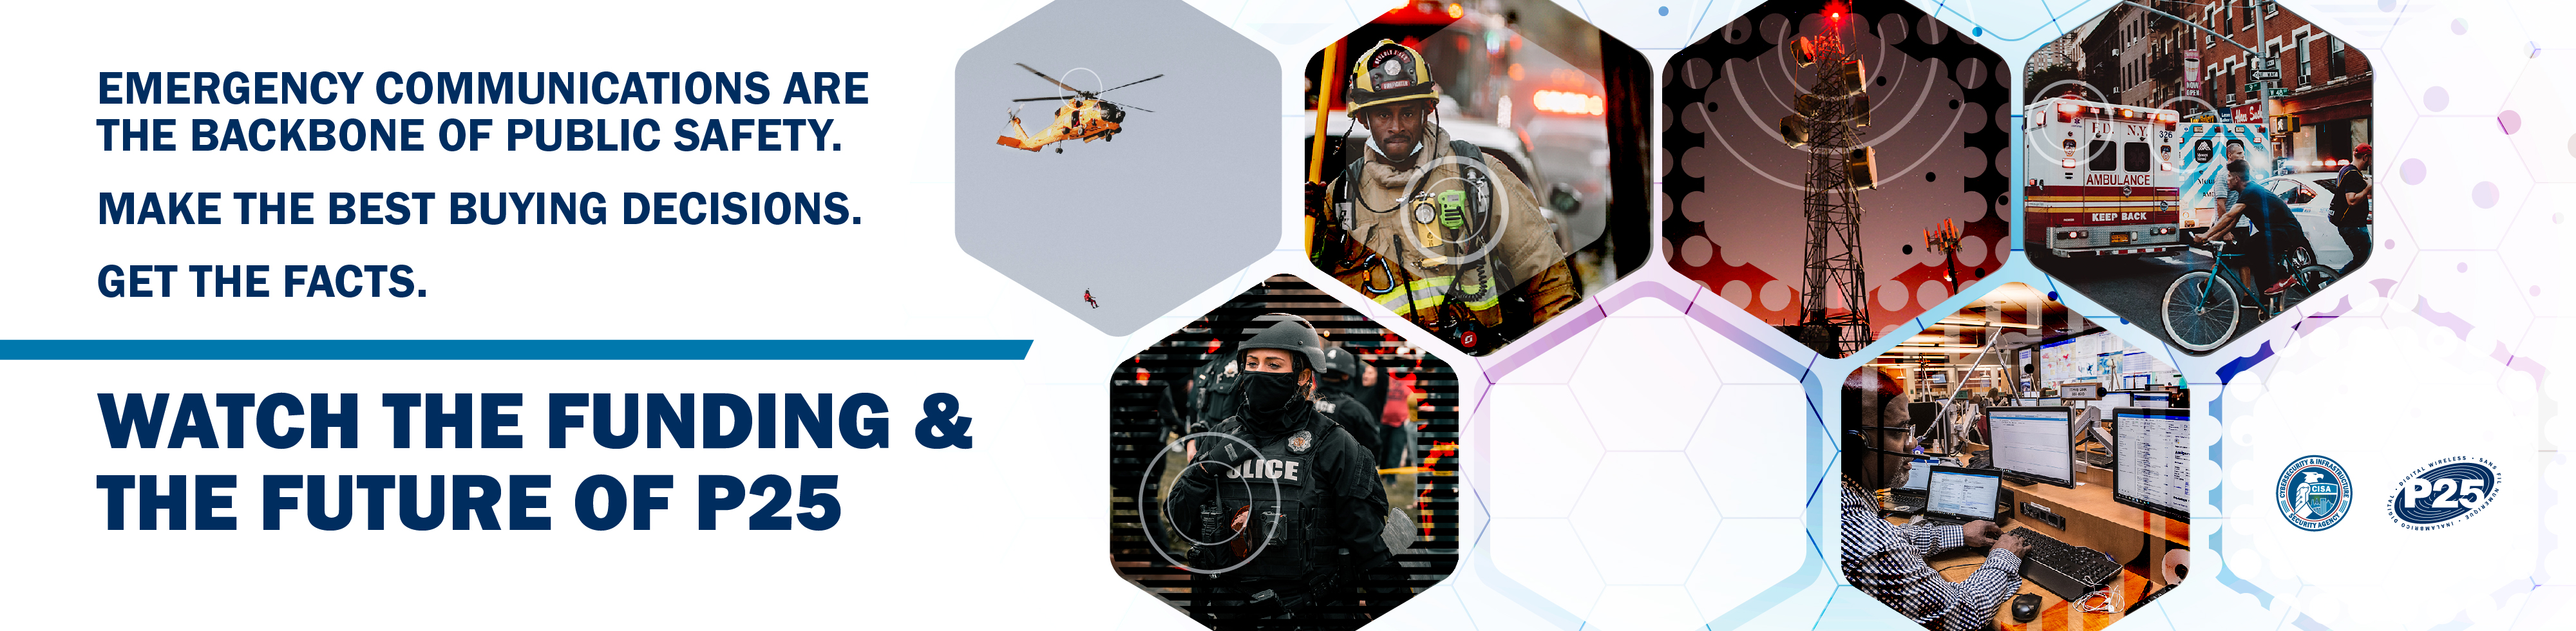 Watch the Future and Funding P25 - Emergency communications are the backbone of public safety. Make the best buying decisions.  Get the facts.